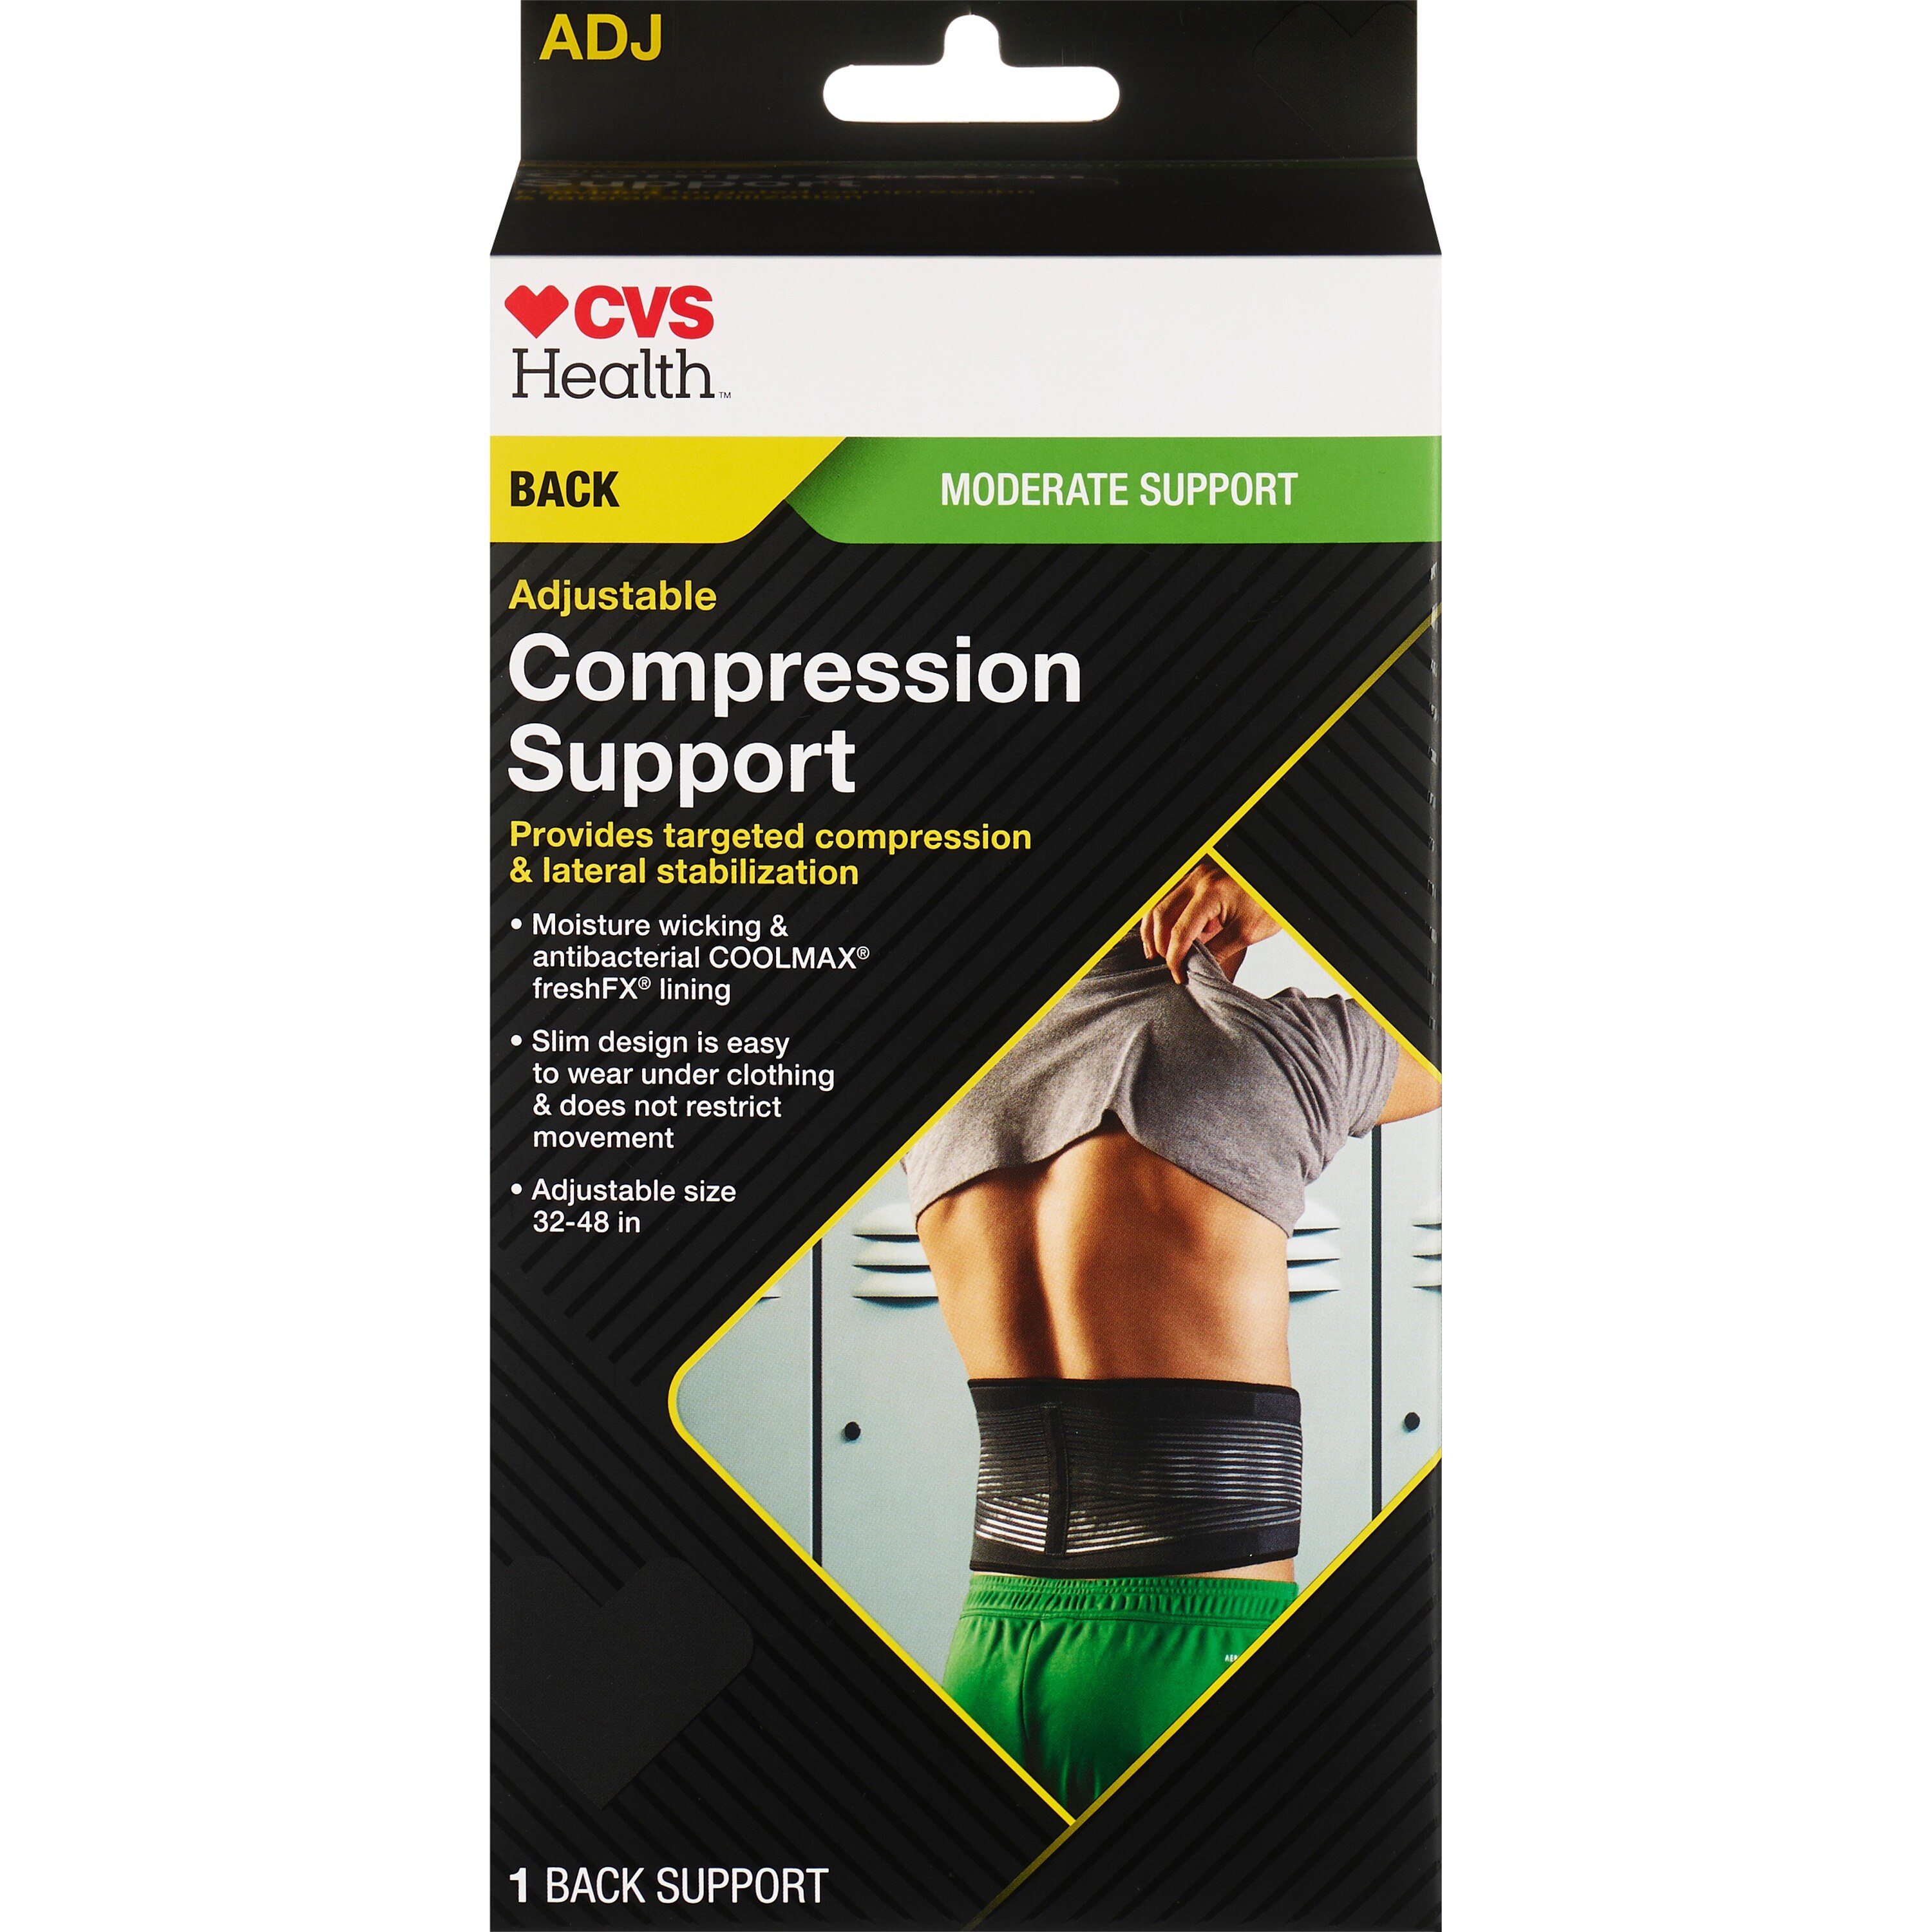 CVS Health Compression Back Support, Moderate Support, Adjustable Size 32-48 in